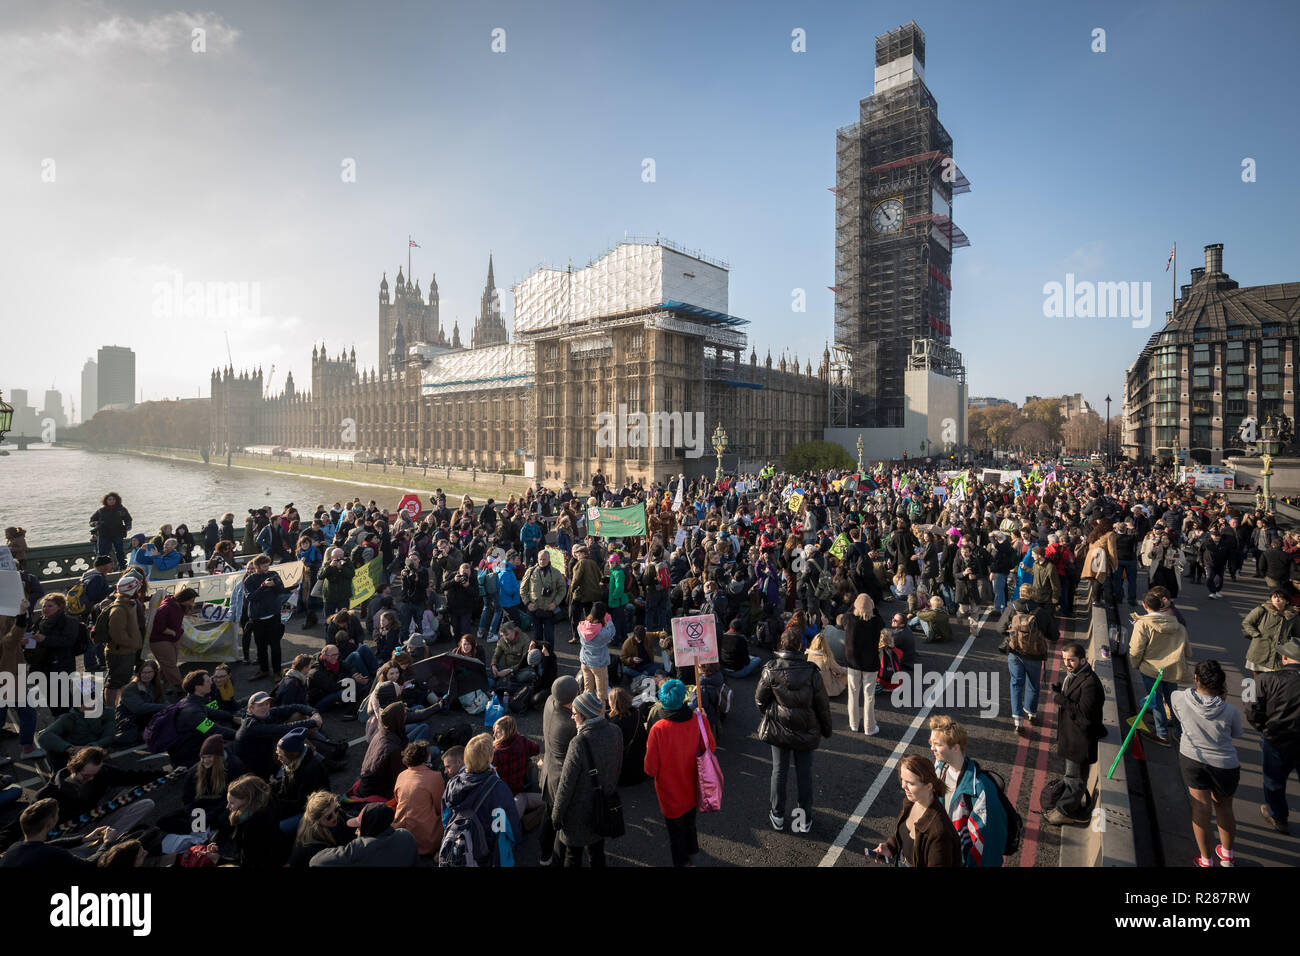 London, UK. 17th November, 2018. Environmental campaigners from Extinction Rebellion block Westminster Bridge, one of five bridges blocked in central London, as part of a Rebellion Day event to highlight 'criminal inaction in the face of climate change catastrophe and ecological collapse' by the UK Government as part of a programme of civil disobedience during which scores of campaigners have been arrested. Credit: Guy Corbishley/Alamy Live News Stock Photo